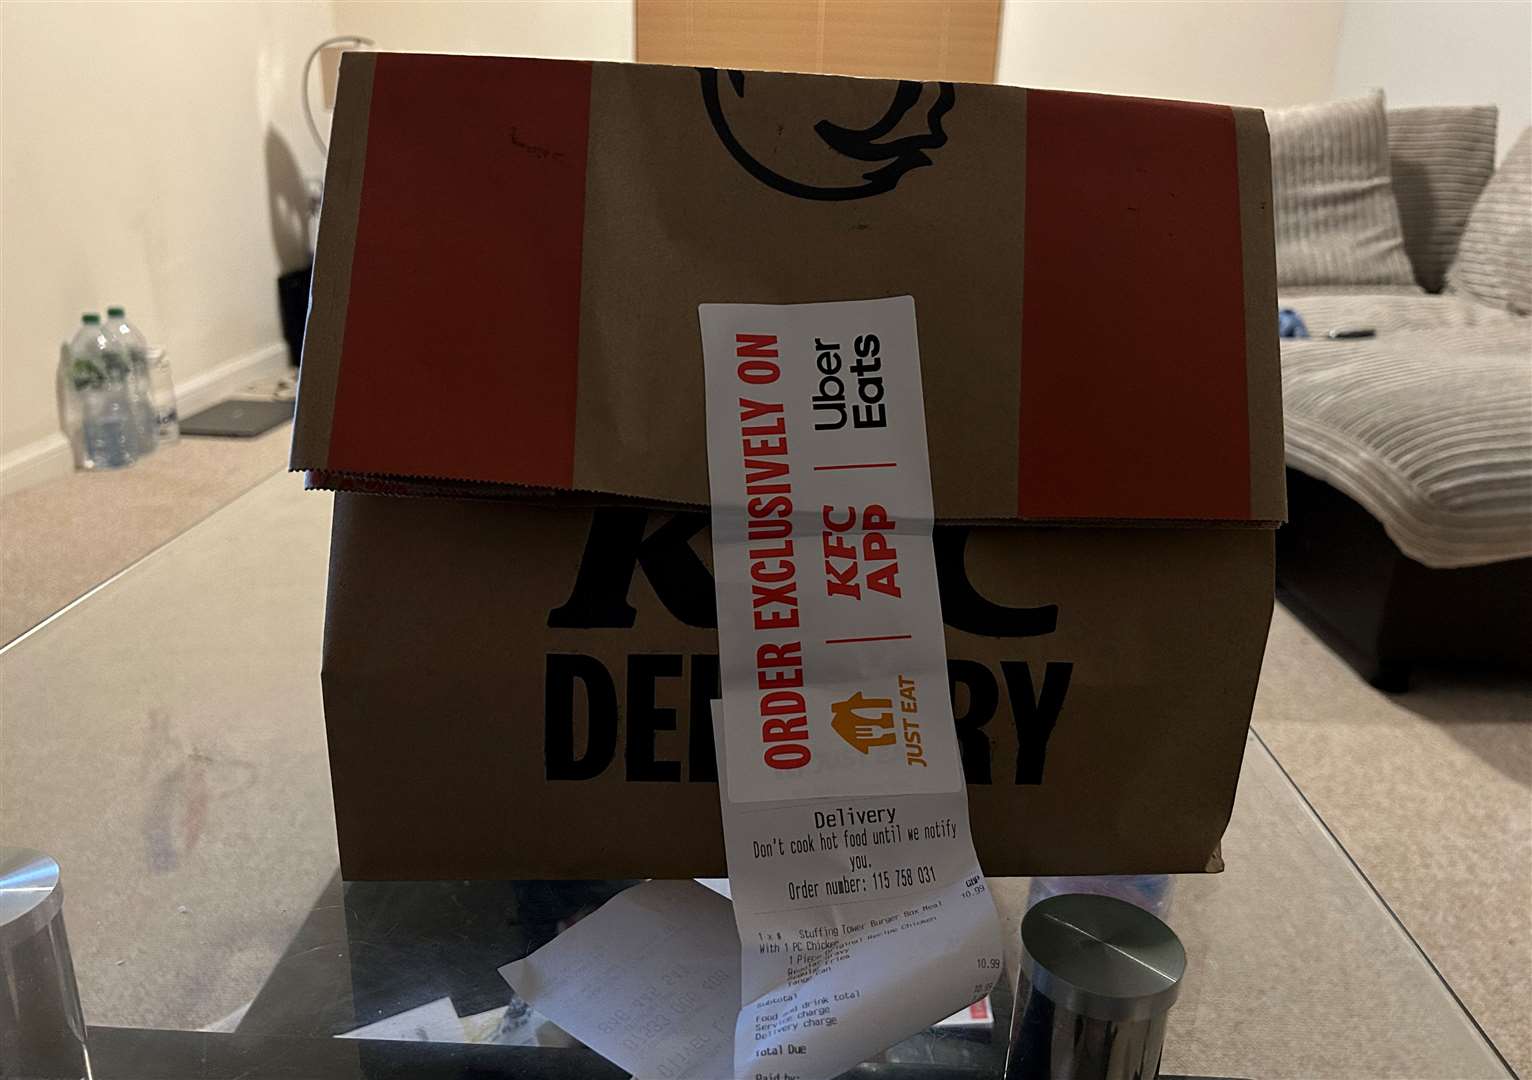 The KFC was delivered within 30 minutes